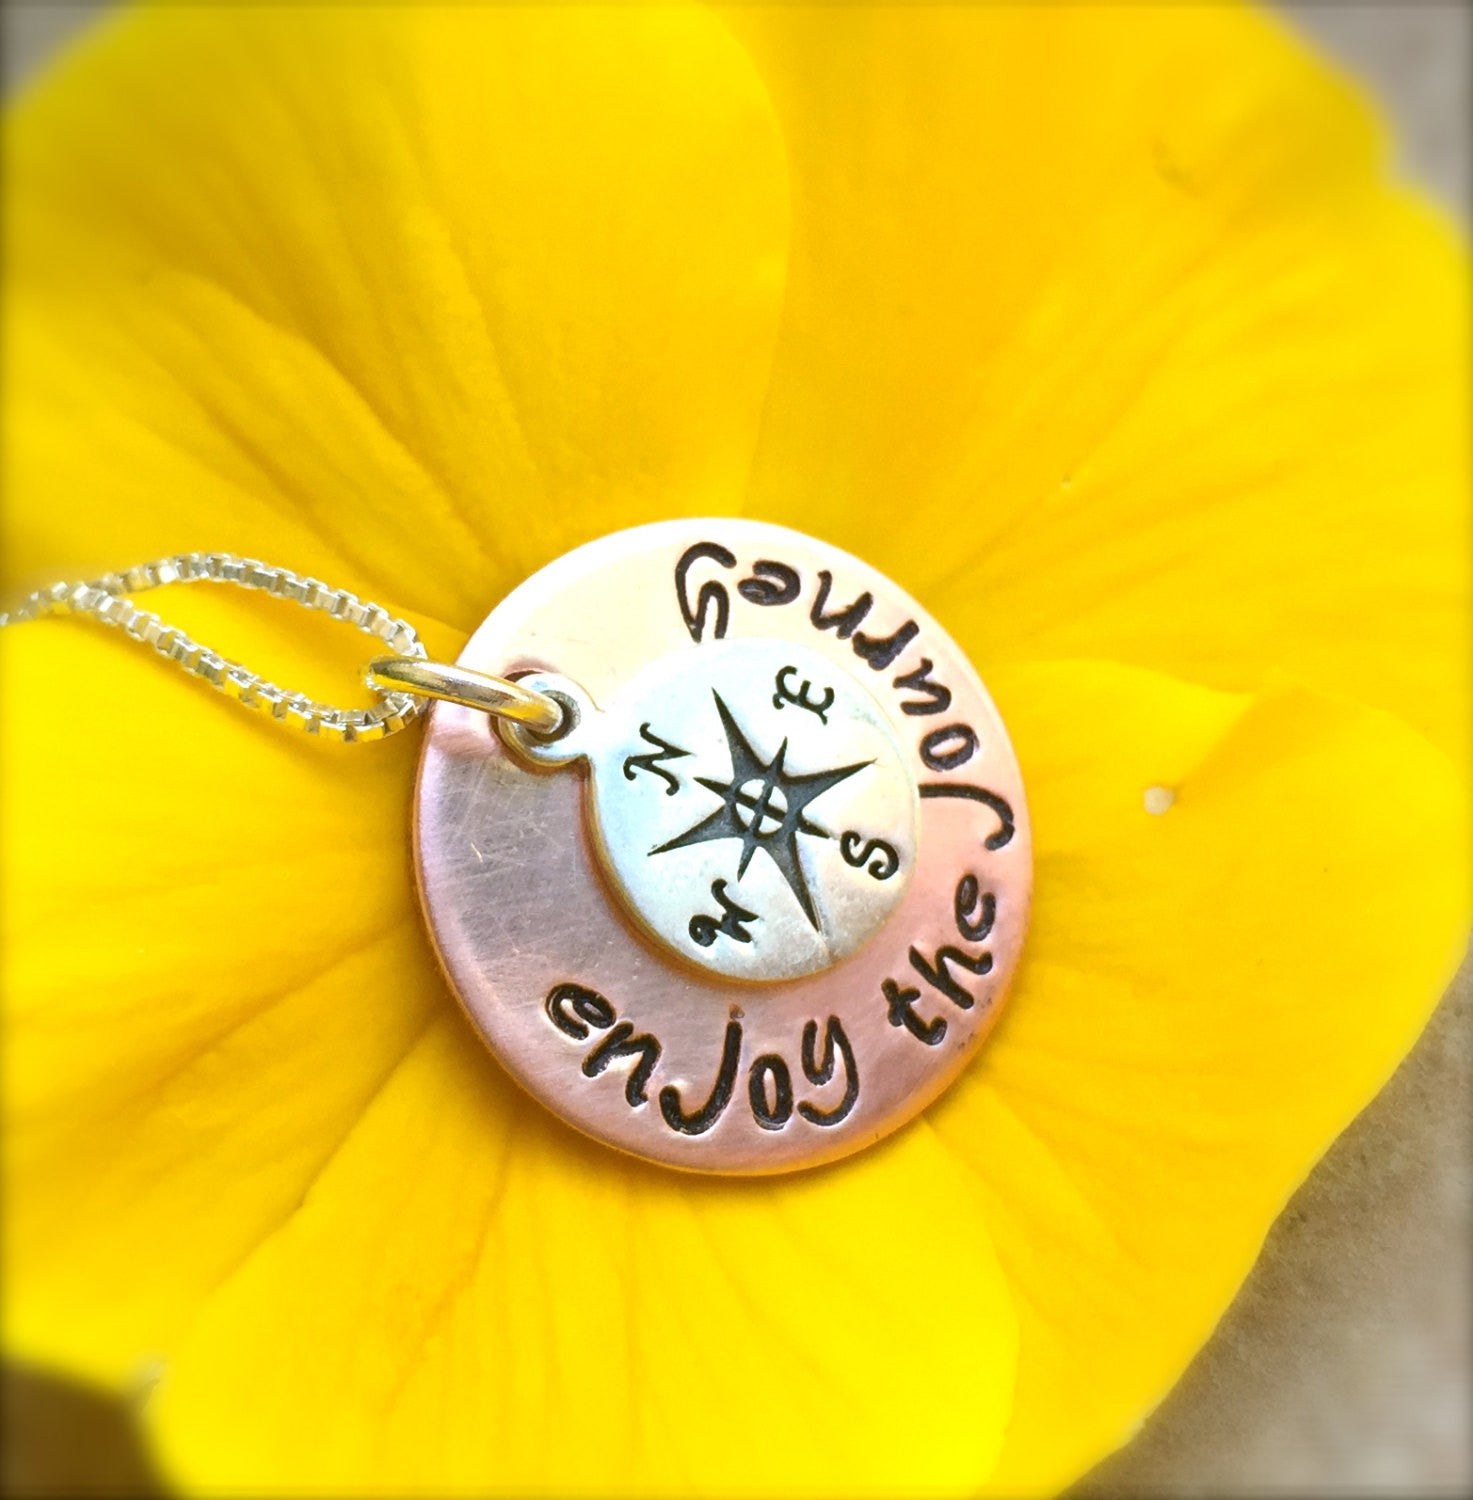 Graduation Gifts, Follow Your Dreams, Enjoy the Journey Necklace, Compass Necklace, Graduation Gifts, College Grad 2016 - Natashaaloha, jewelry, bracelets, necklace, keychains, fishing lures, gifts for men, charms, personalized, 